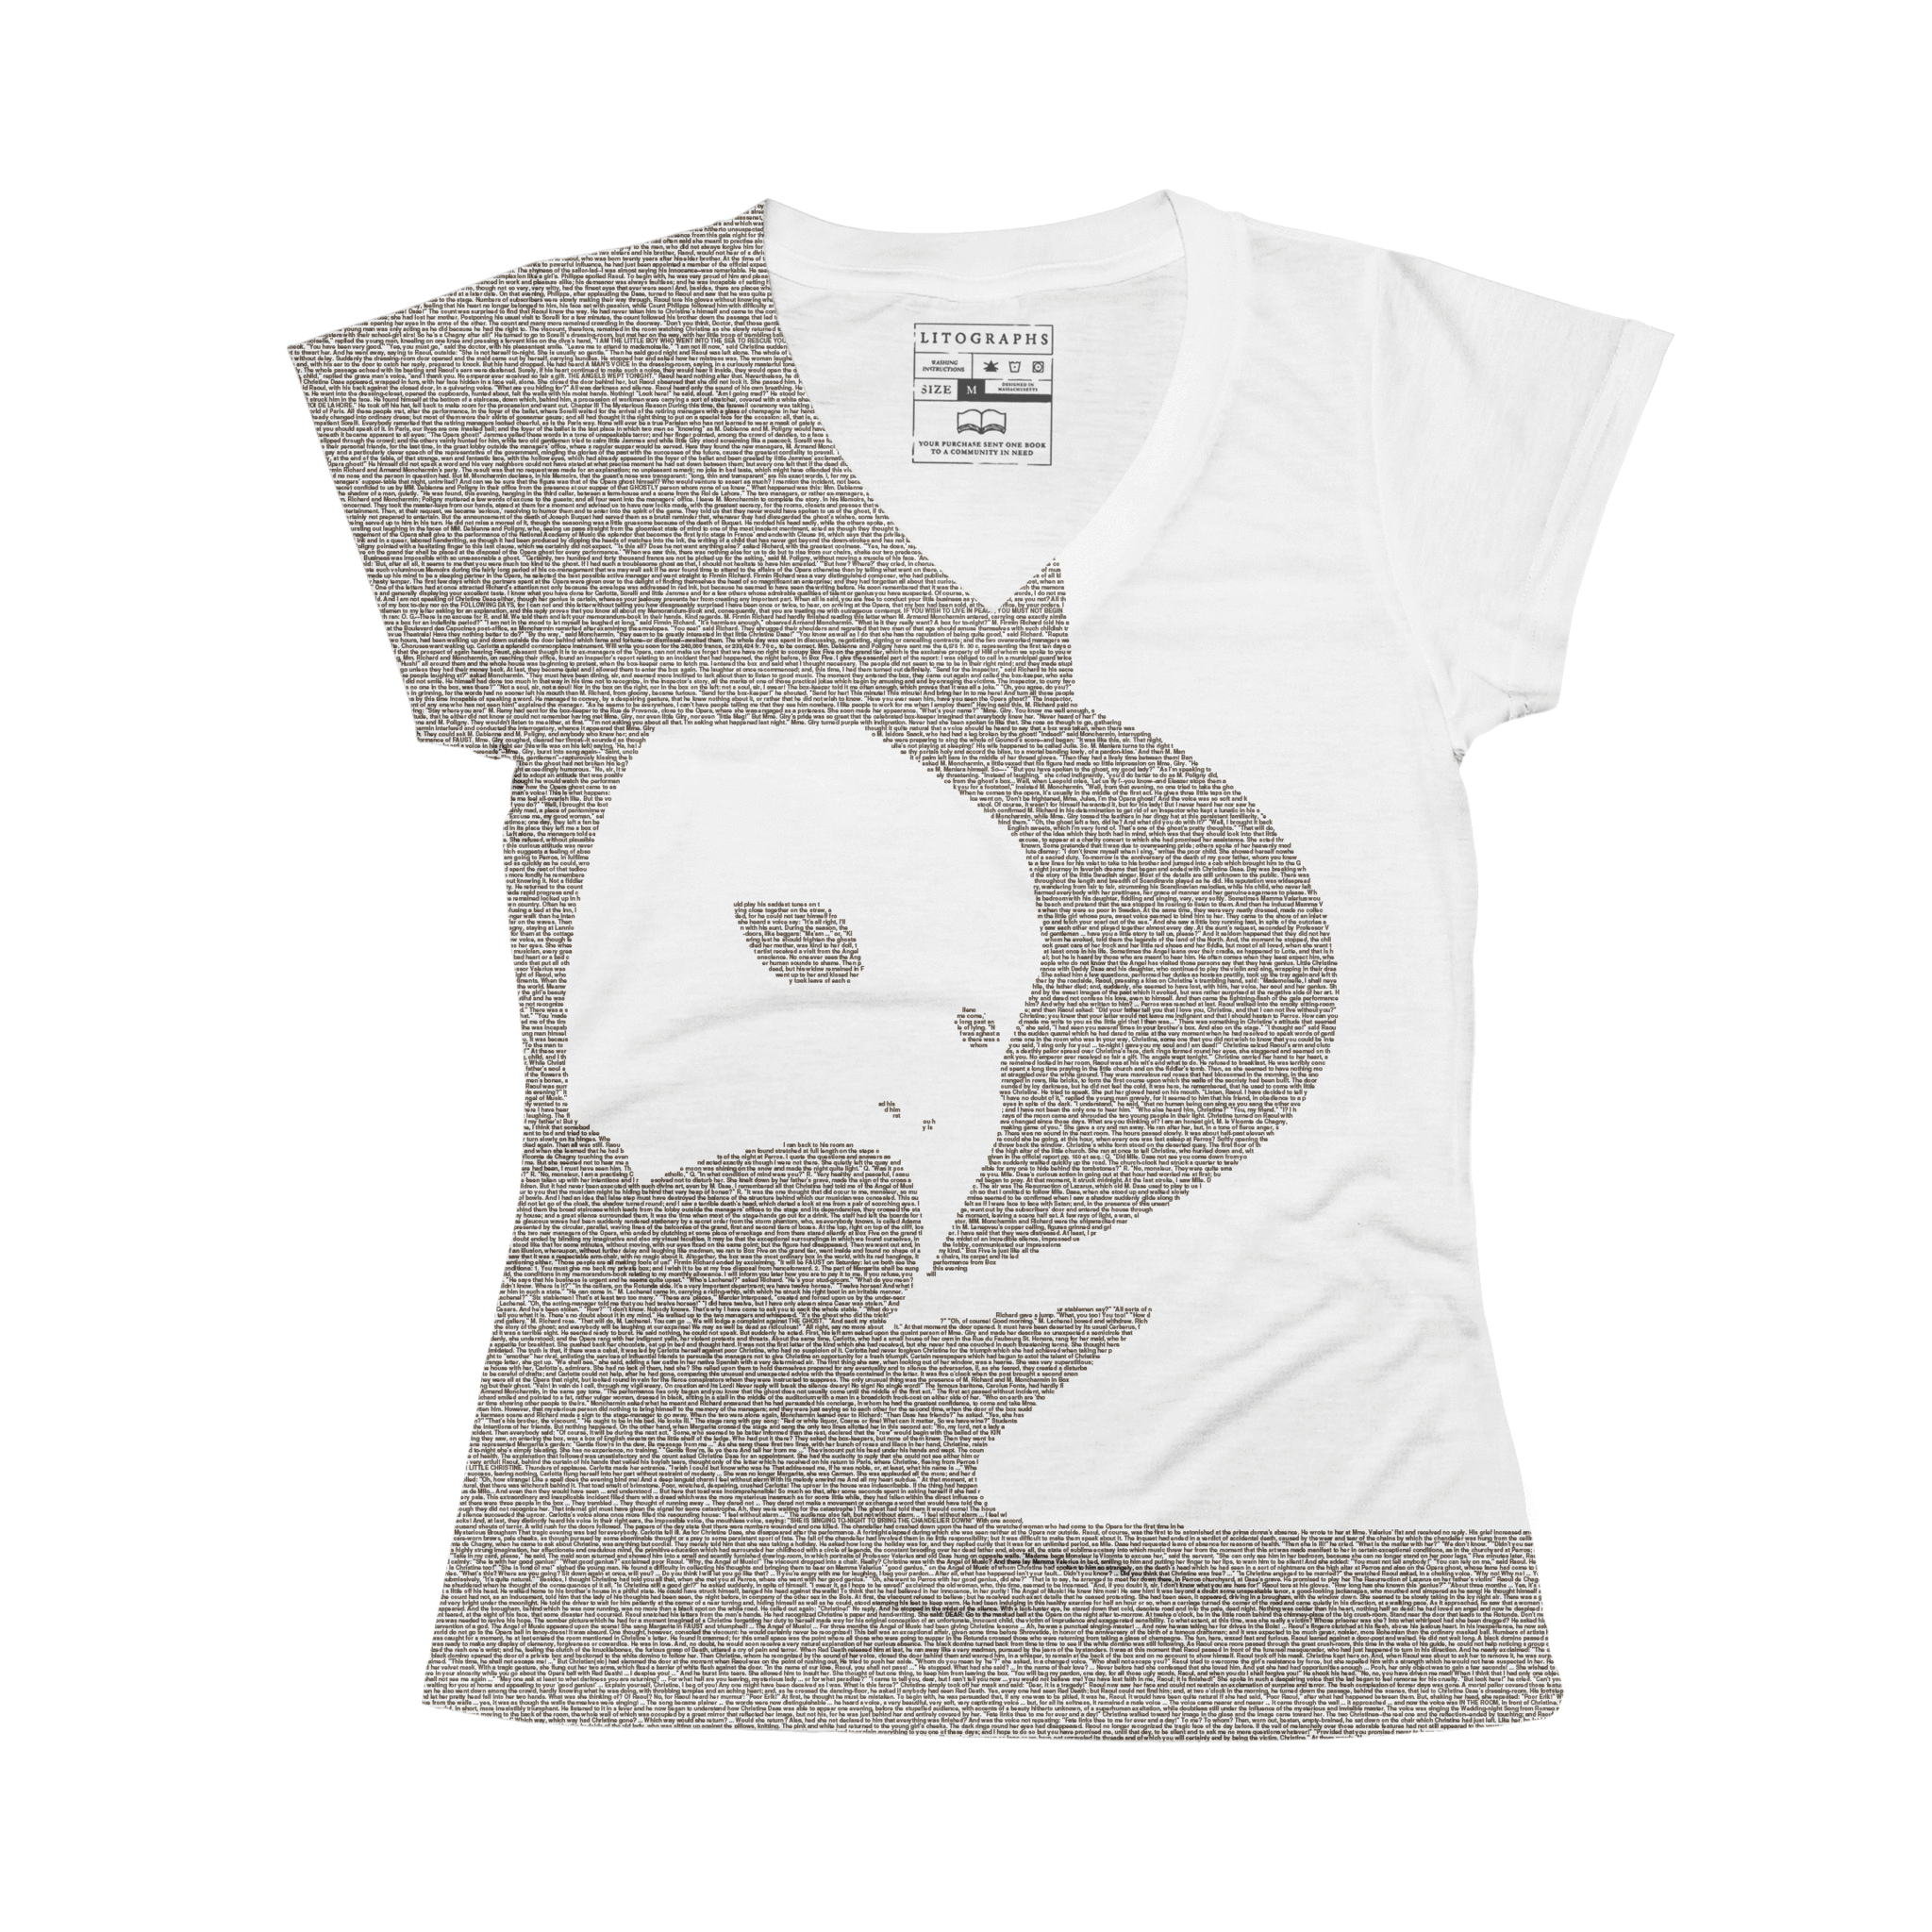 Created from the text of The Phantom of the Opera